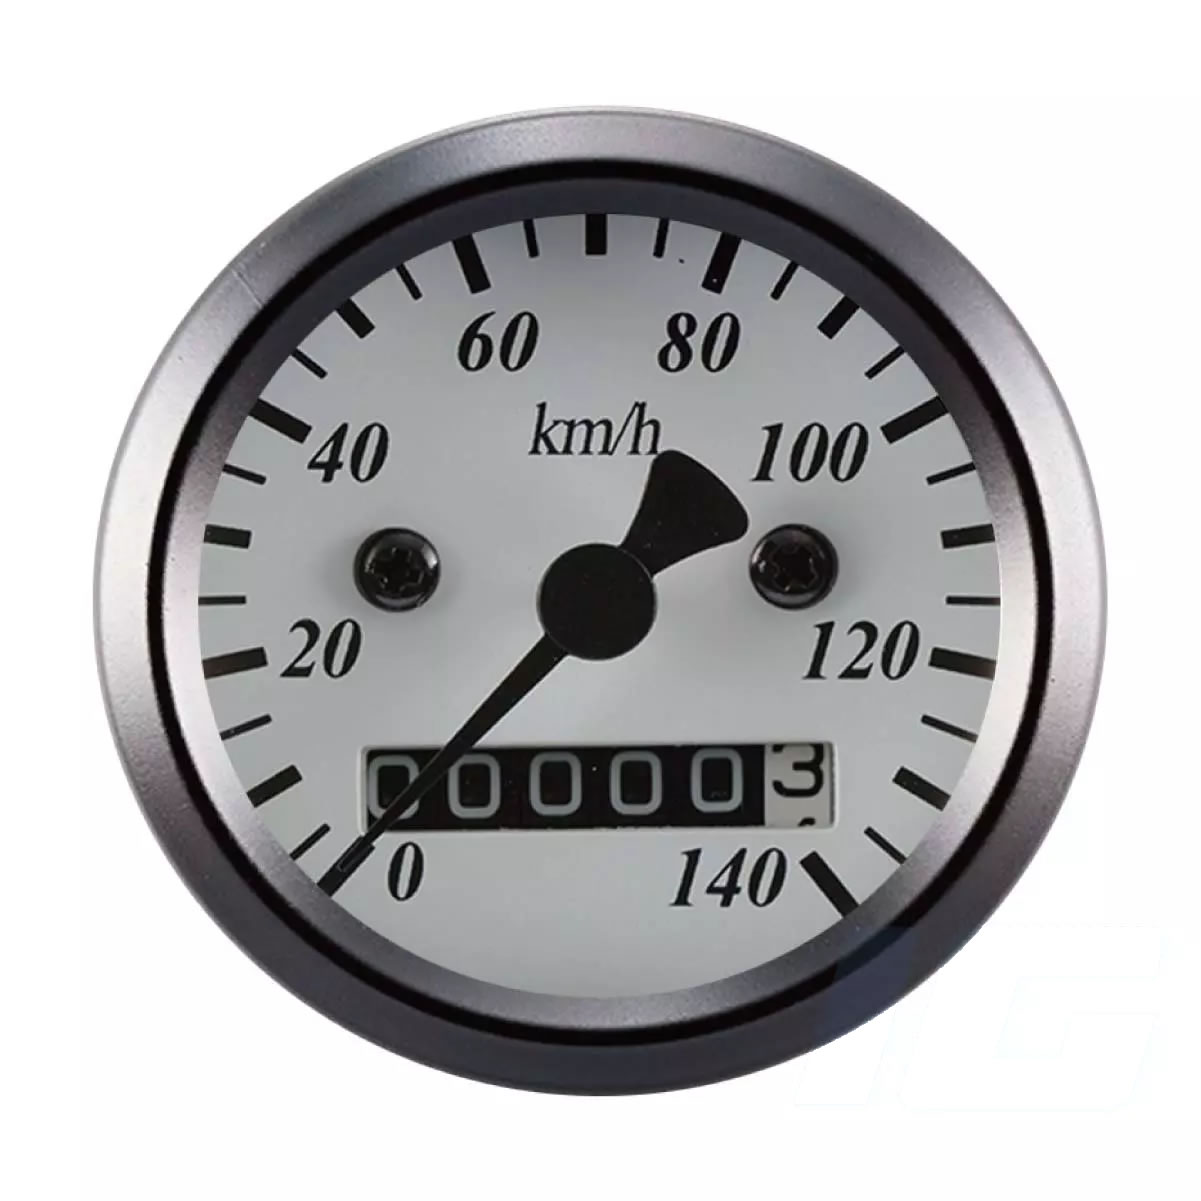 48mm White Face Universal Aftermarket Gauge Mechanical Speedometer for Motorcycle